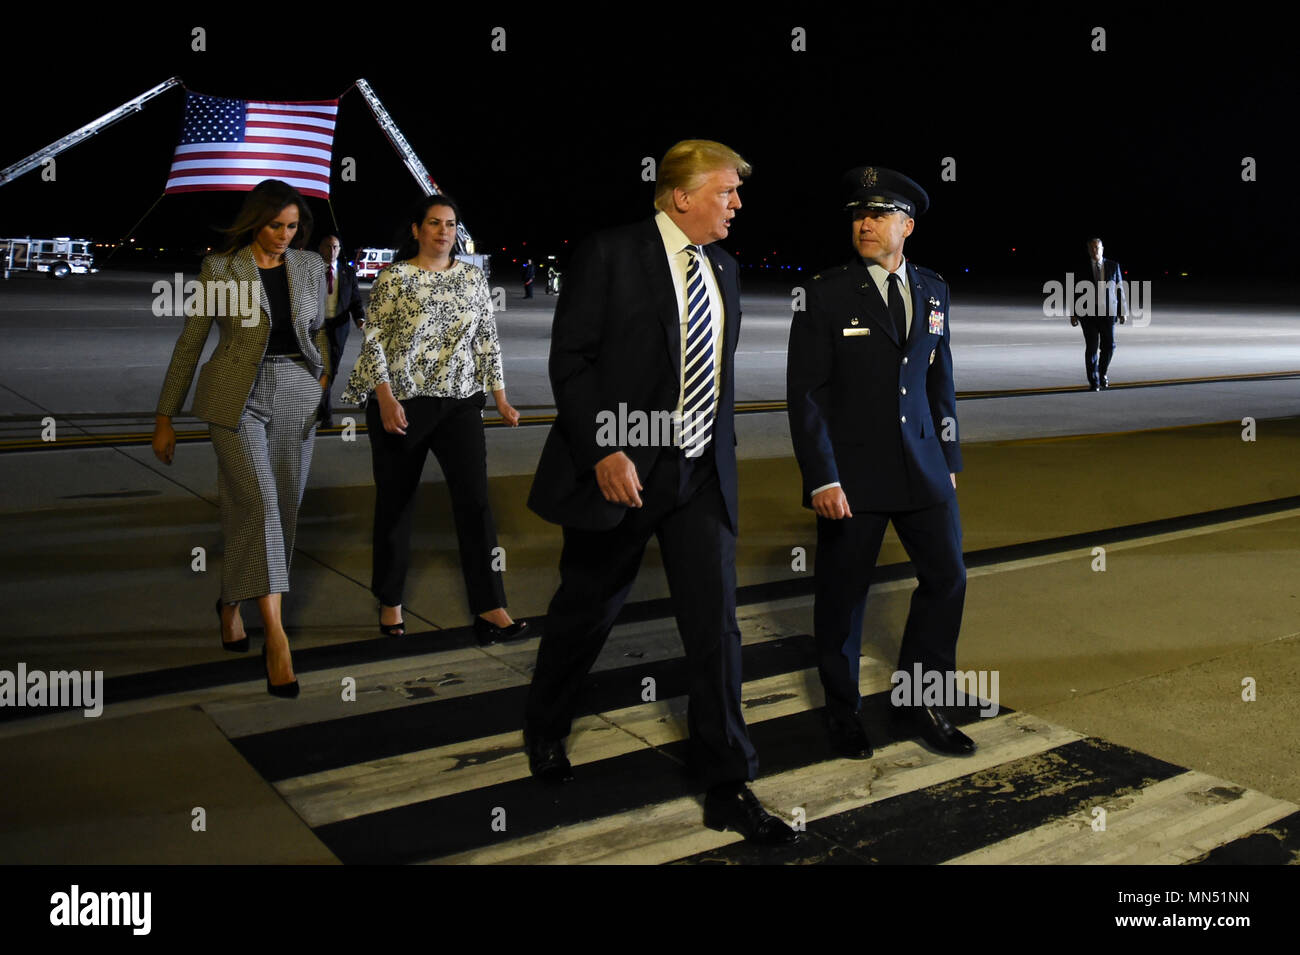 President of the United States Donald J. Trump and First Lady Melania Trump walks with Col. Casey D. Eaton, 89th Airlift Wing commander and his wife Lisa Eaton at Joint Base Andrews, Md., May 10, 2018 as they prepare to greet three Americans who were freed from North Korea on May 9, 2018. An 89th AW C-40 high-priority personnel transport aircraft carried Kim Dong-chul, Tony Kim and Kim Hak-song from North Korea to Anchorage, Alaska where the plane refueled before arriving at JBA at 3 a.m. EST. The 89th AW executes special missions such as these on a routine basis while enabling national intere Stock Photo